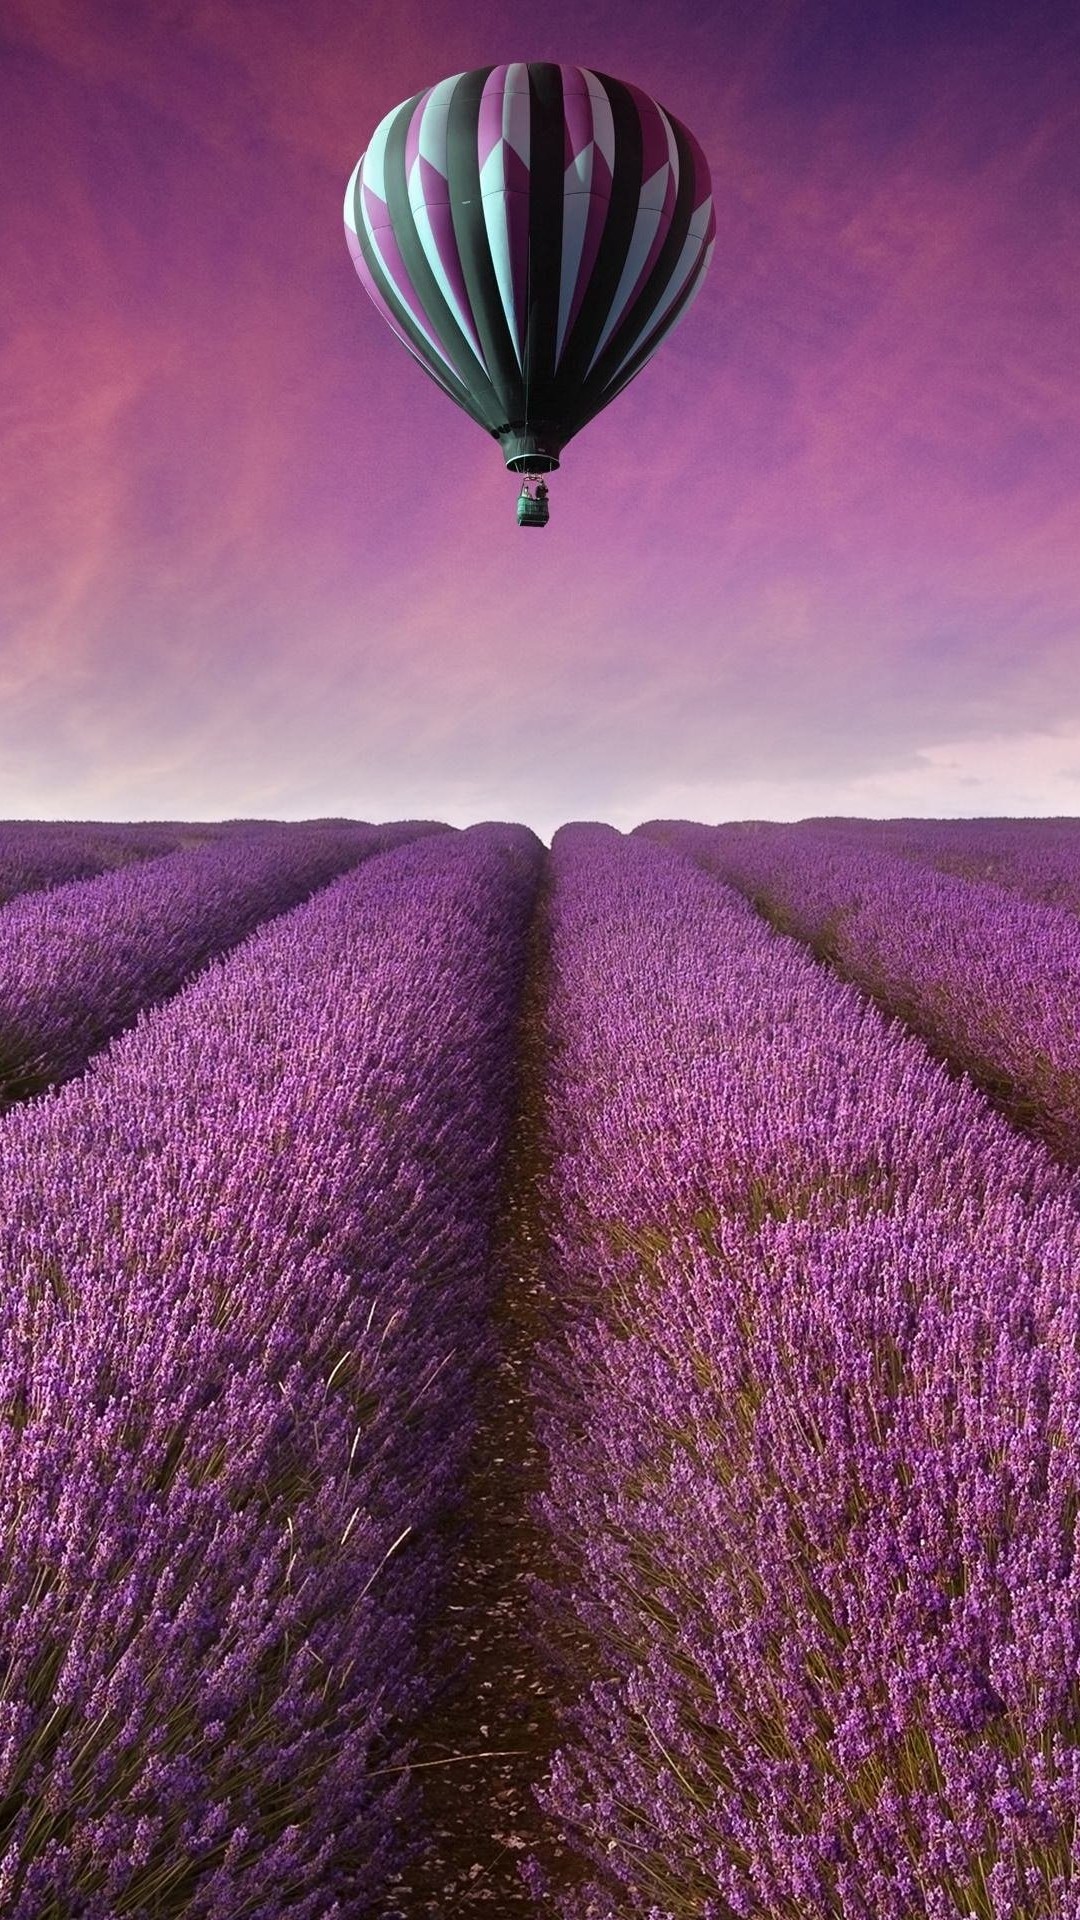 Hot Air Balloon Over Lavender Field Wallpaper for LG G2